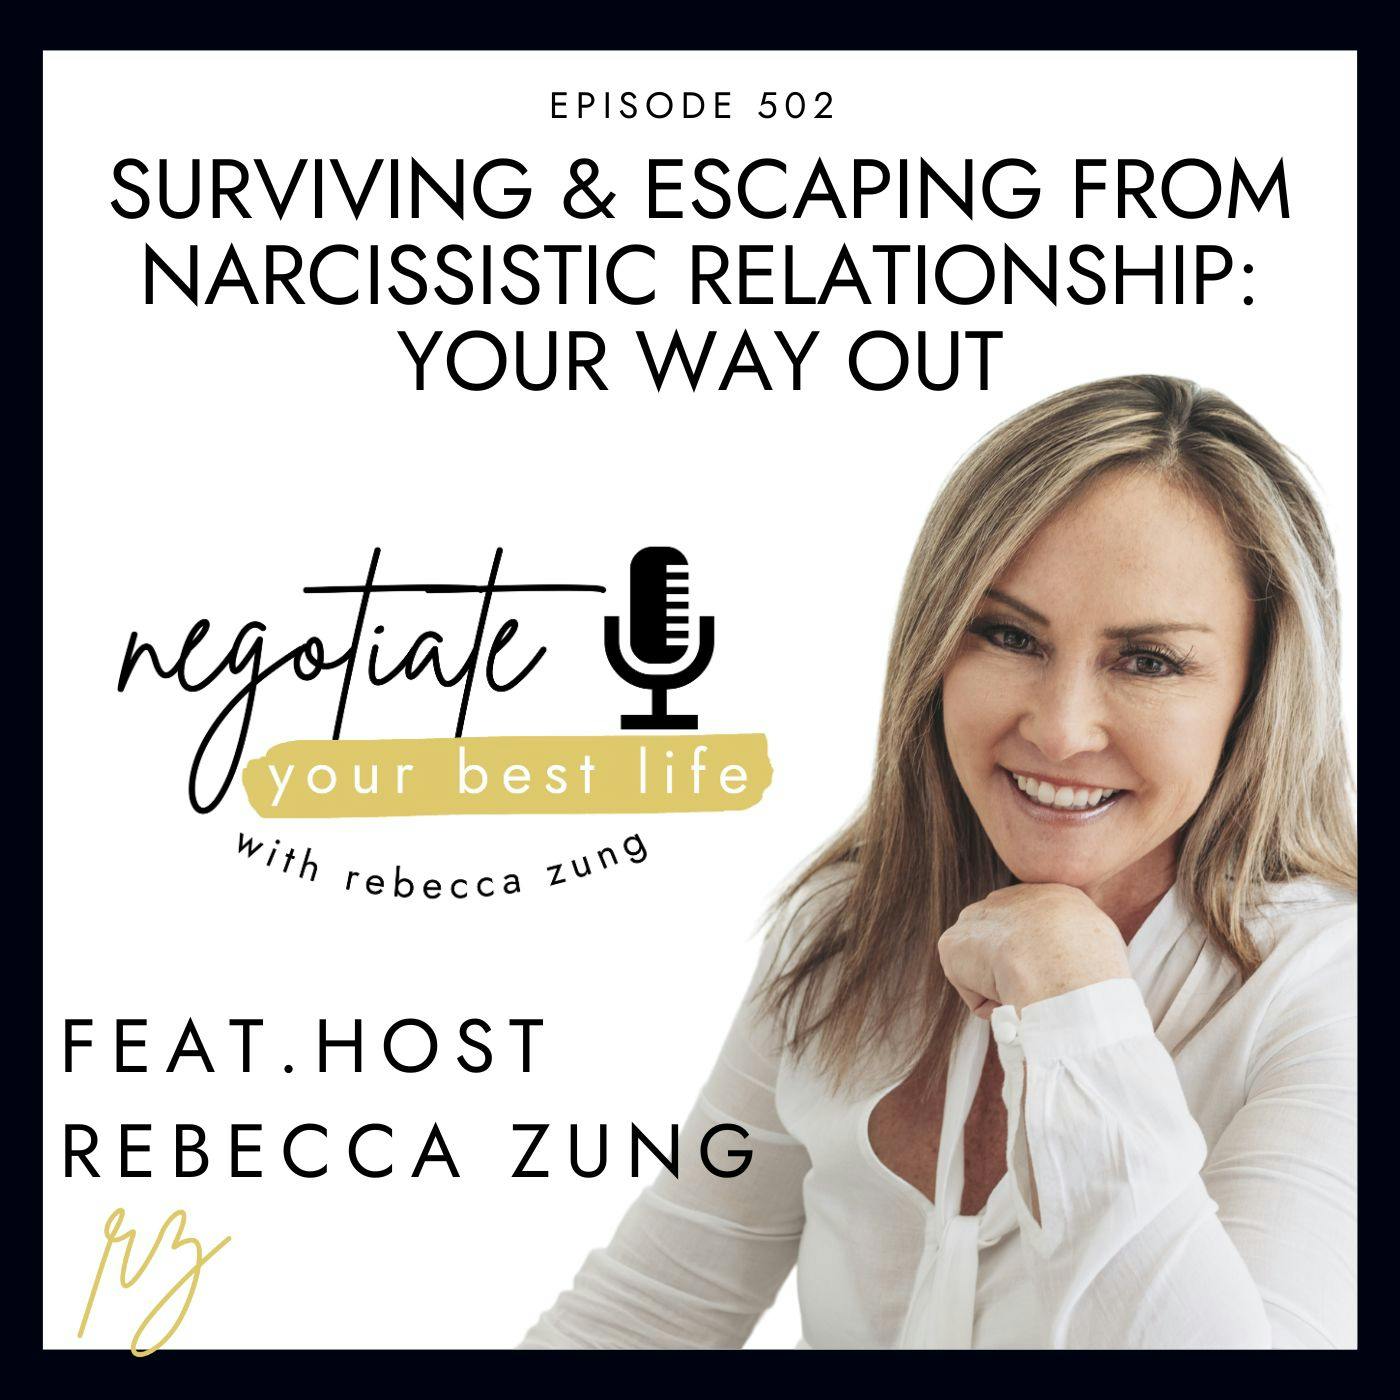 Surviving & Escaping From Narcissistic Relationship: Your Way OUT with Rebecca Zung on Negotiate Your Best Life #502